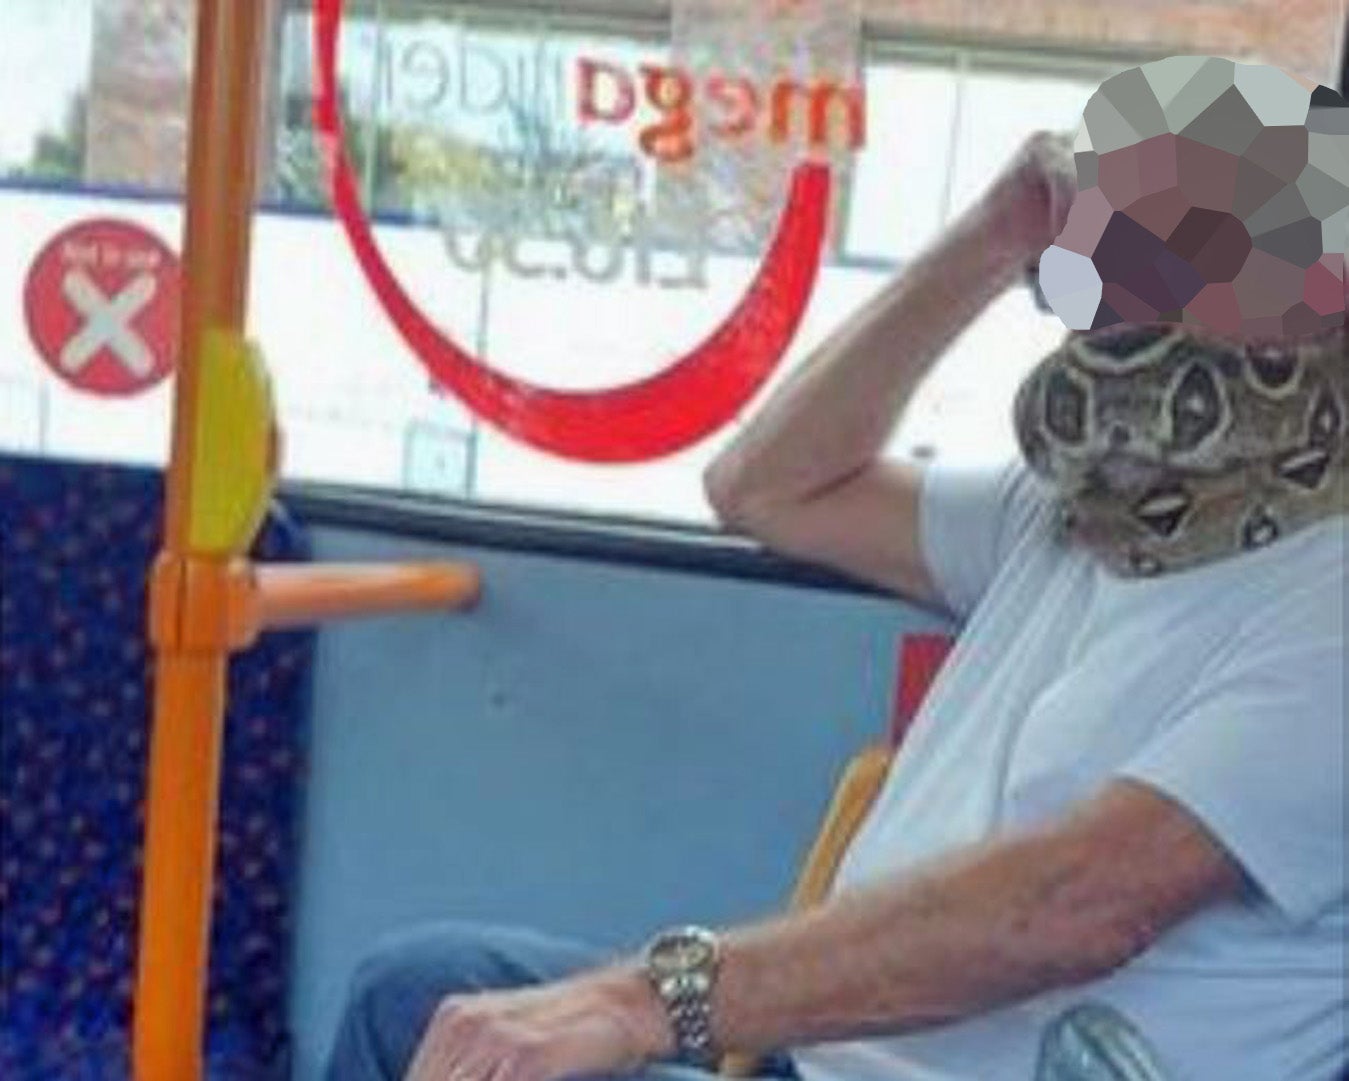 A man riding on a bus in Salford using a snake as a face mask